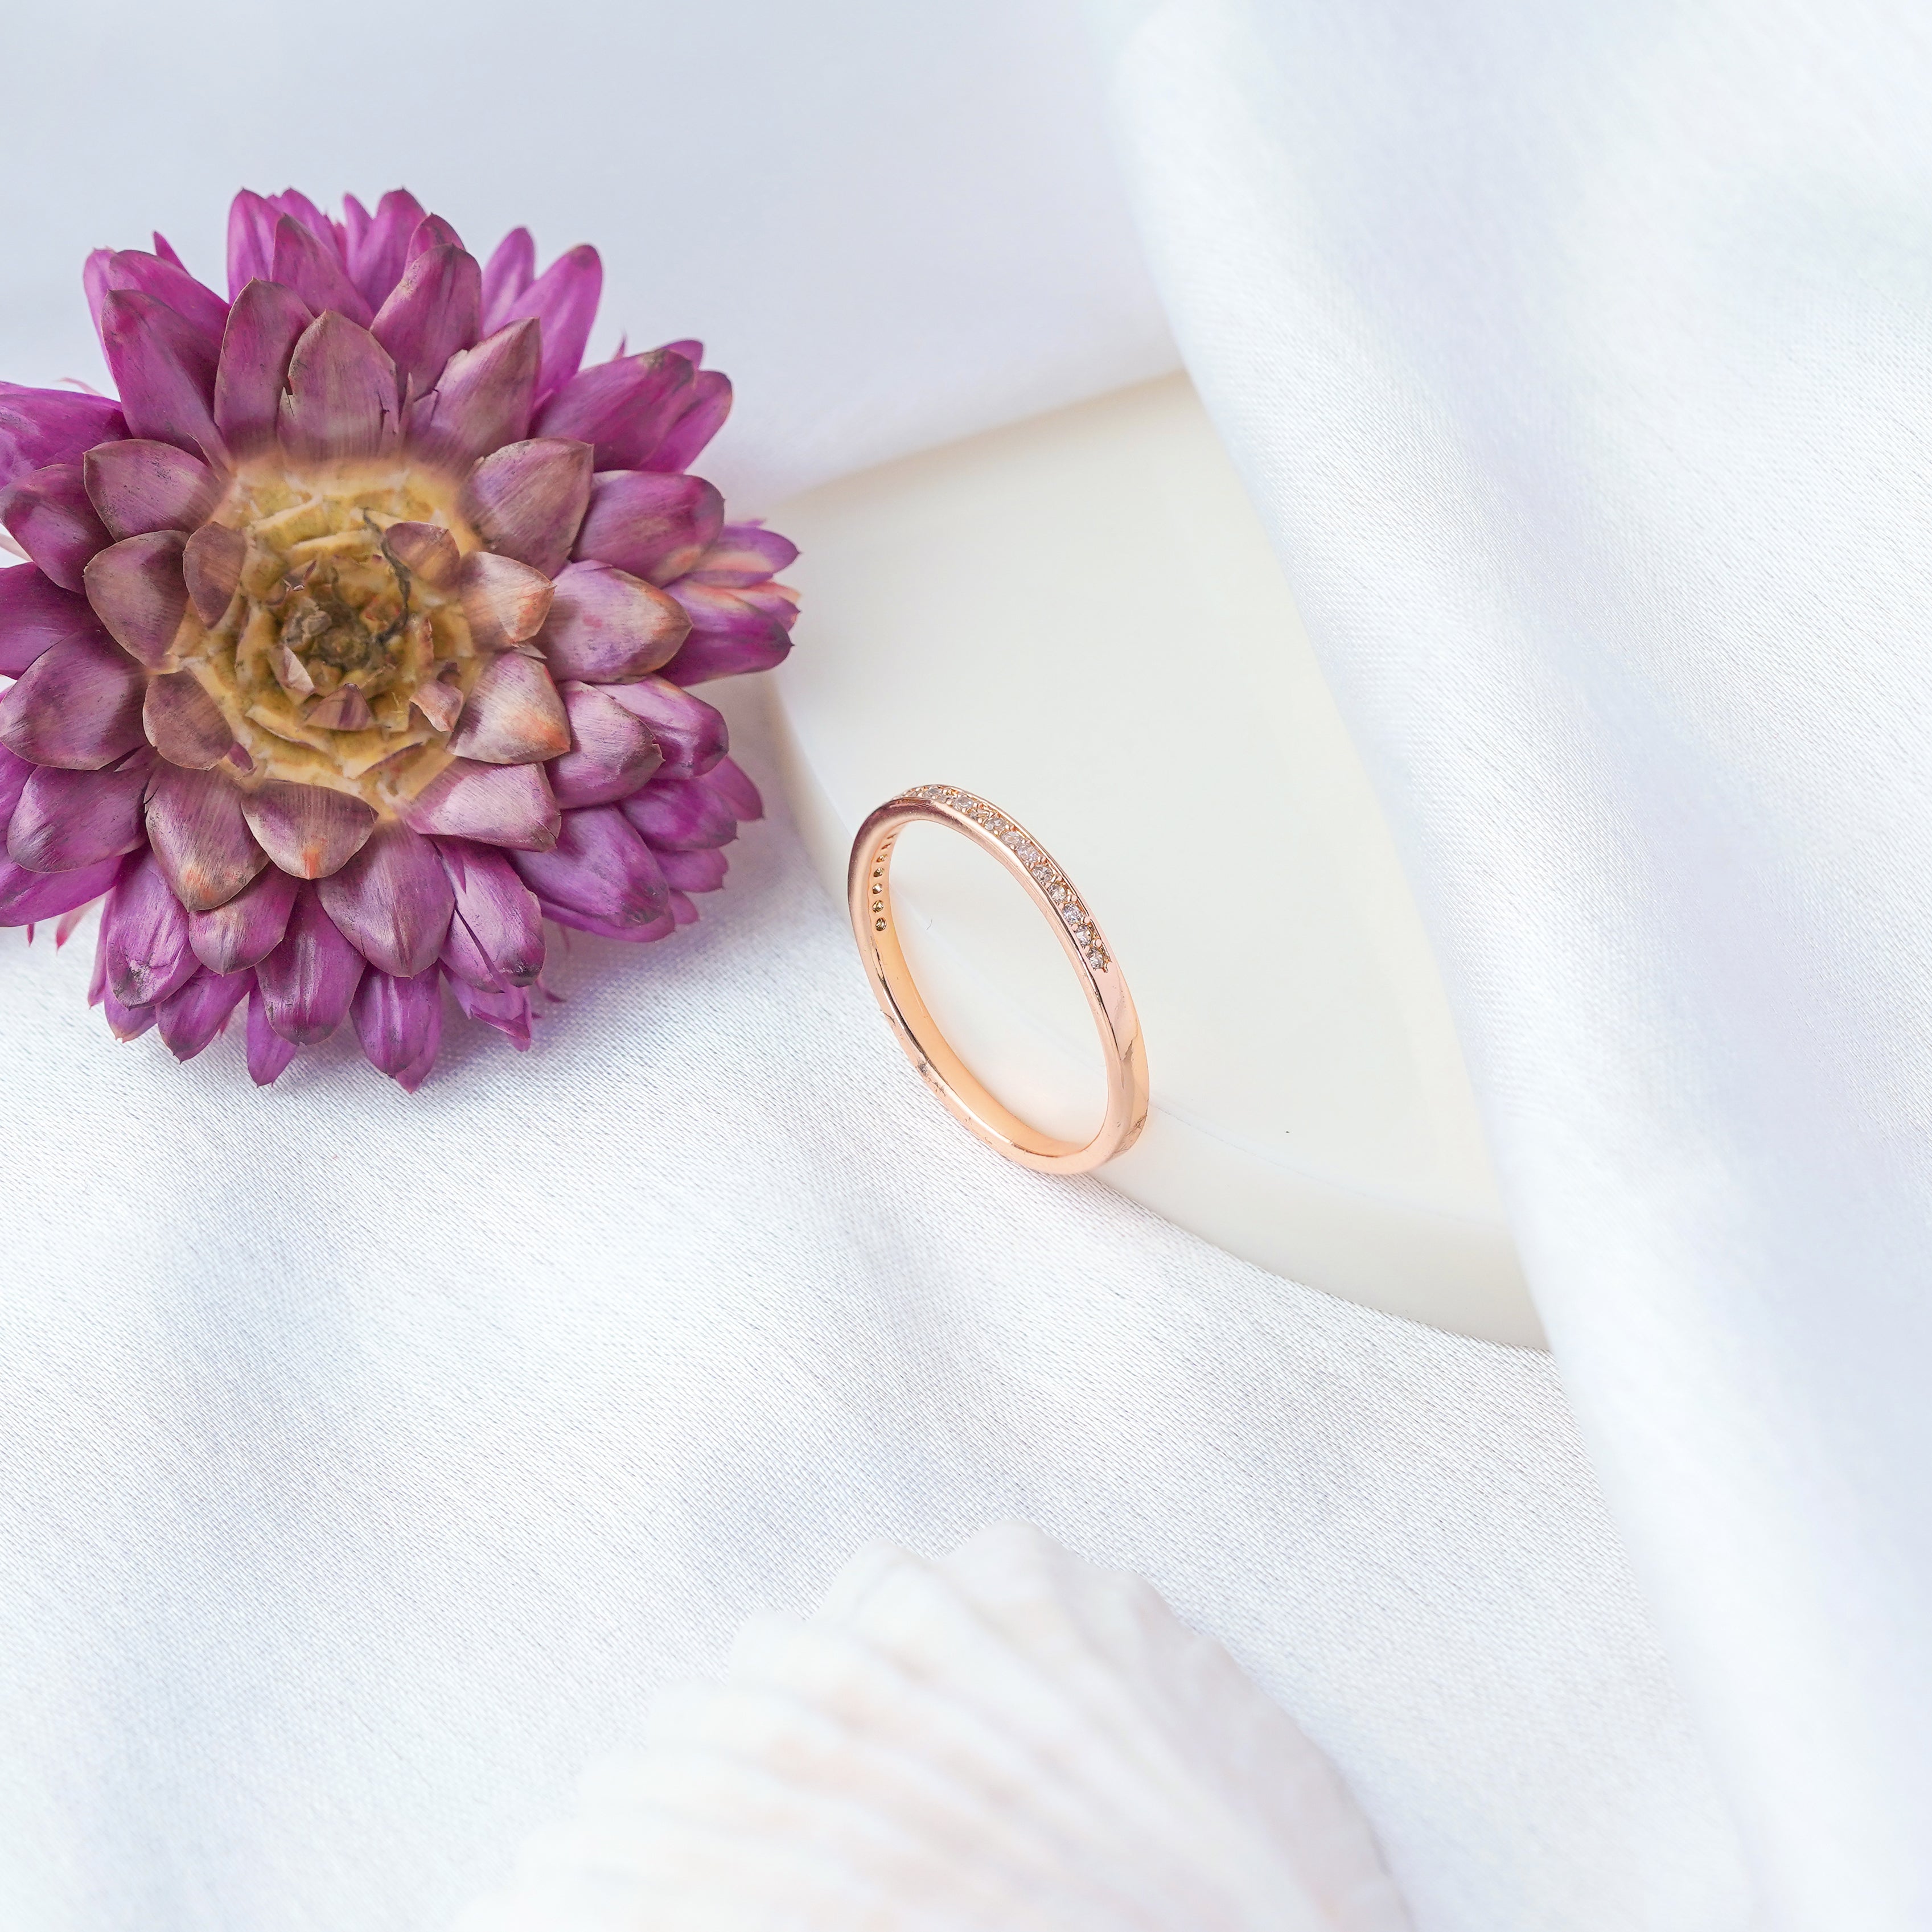 Jewelsium Rose Gold Designer Ring: Where Style Meets Perfection